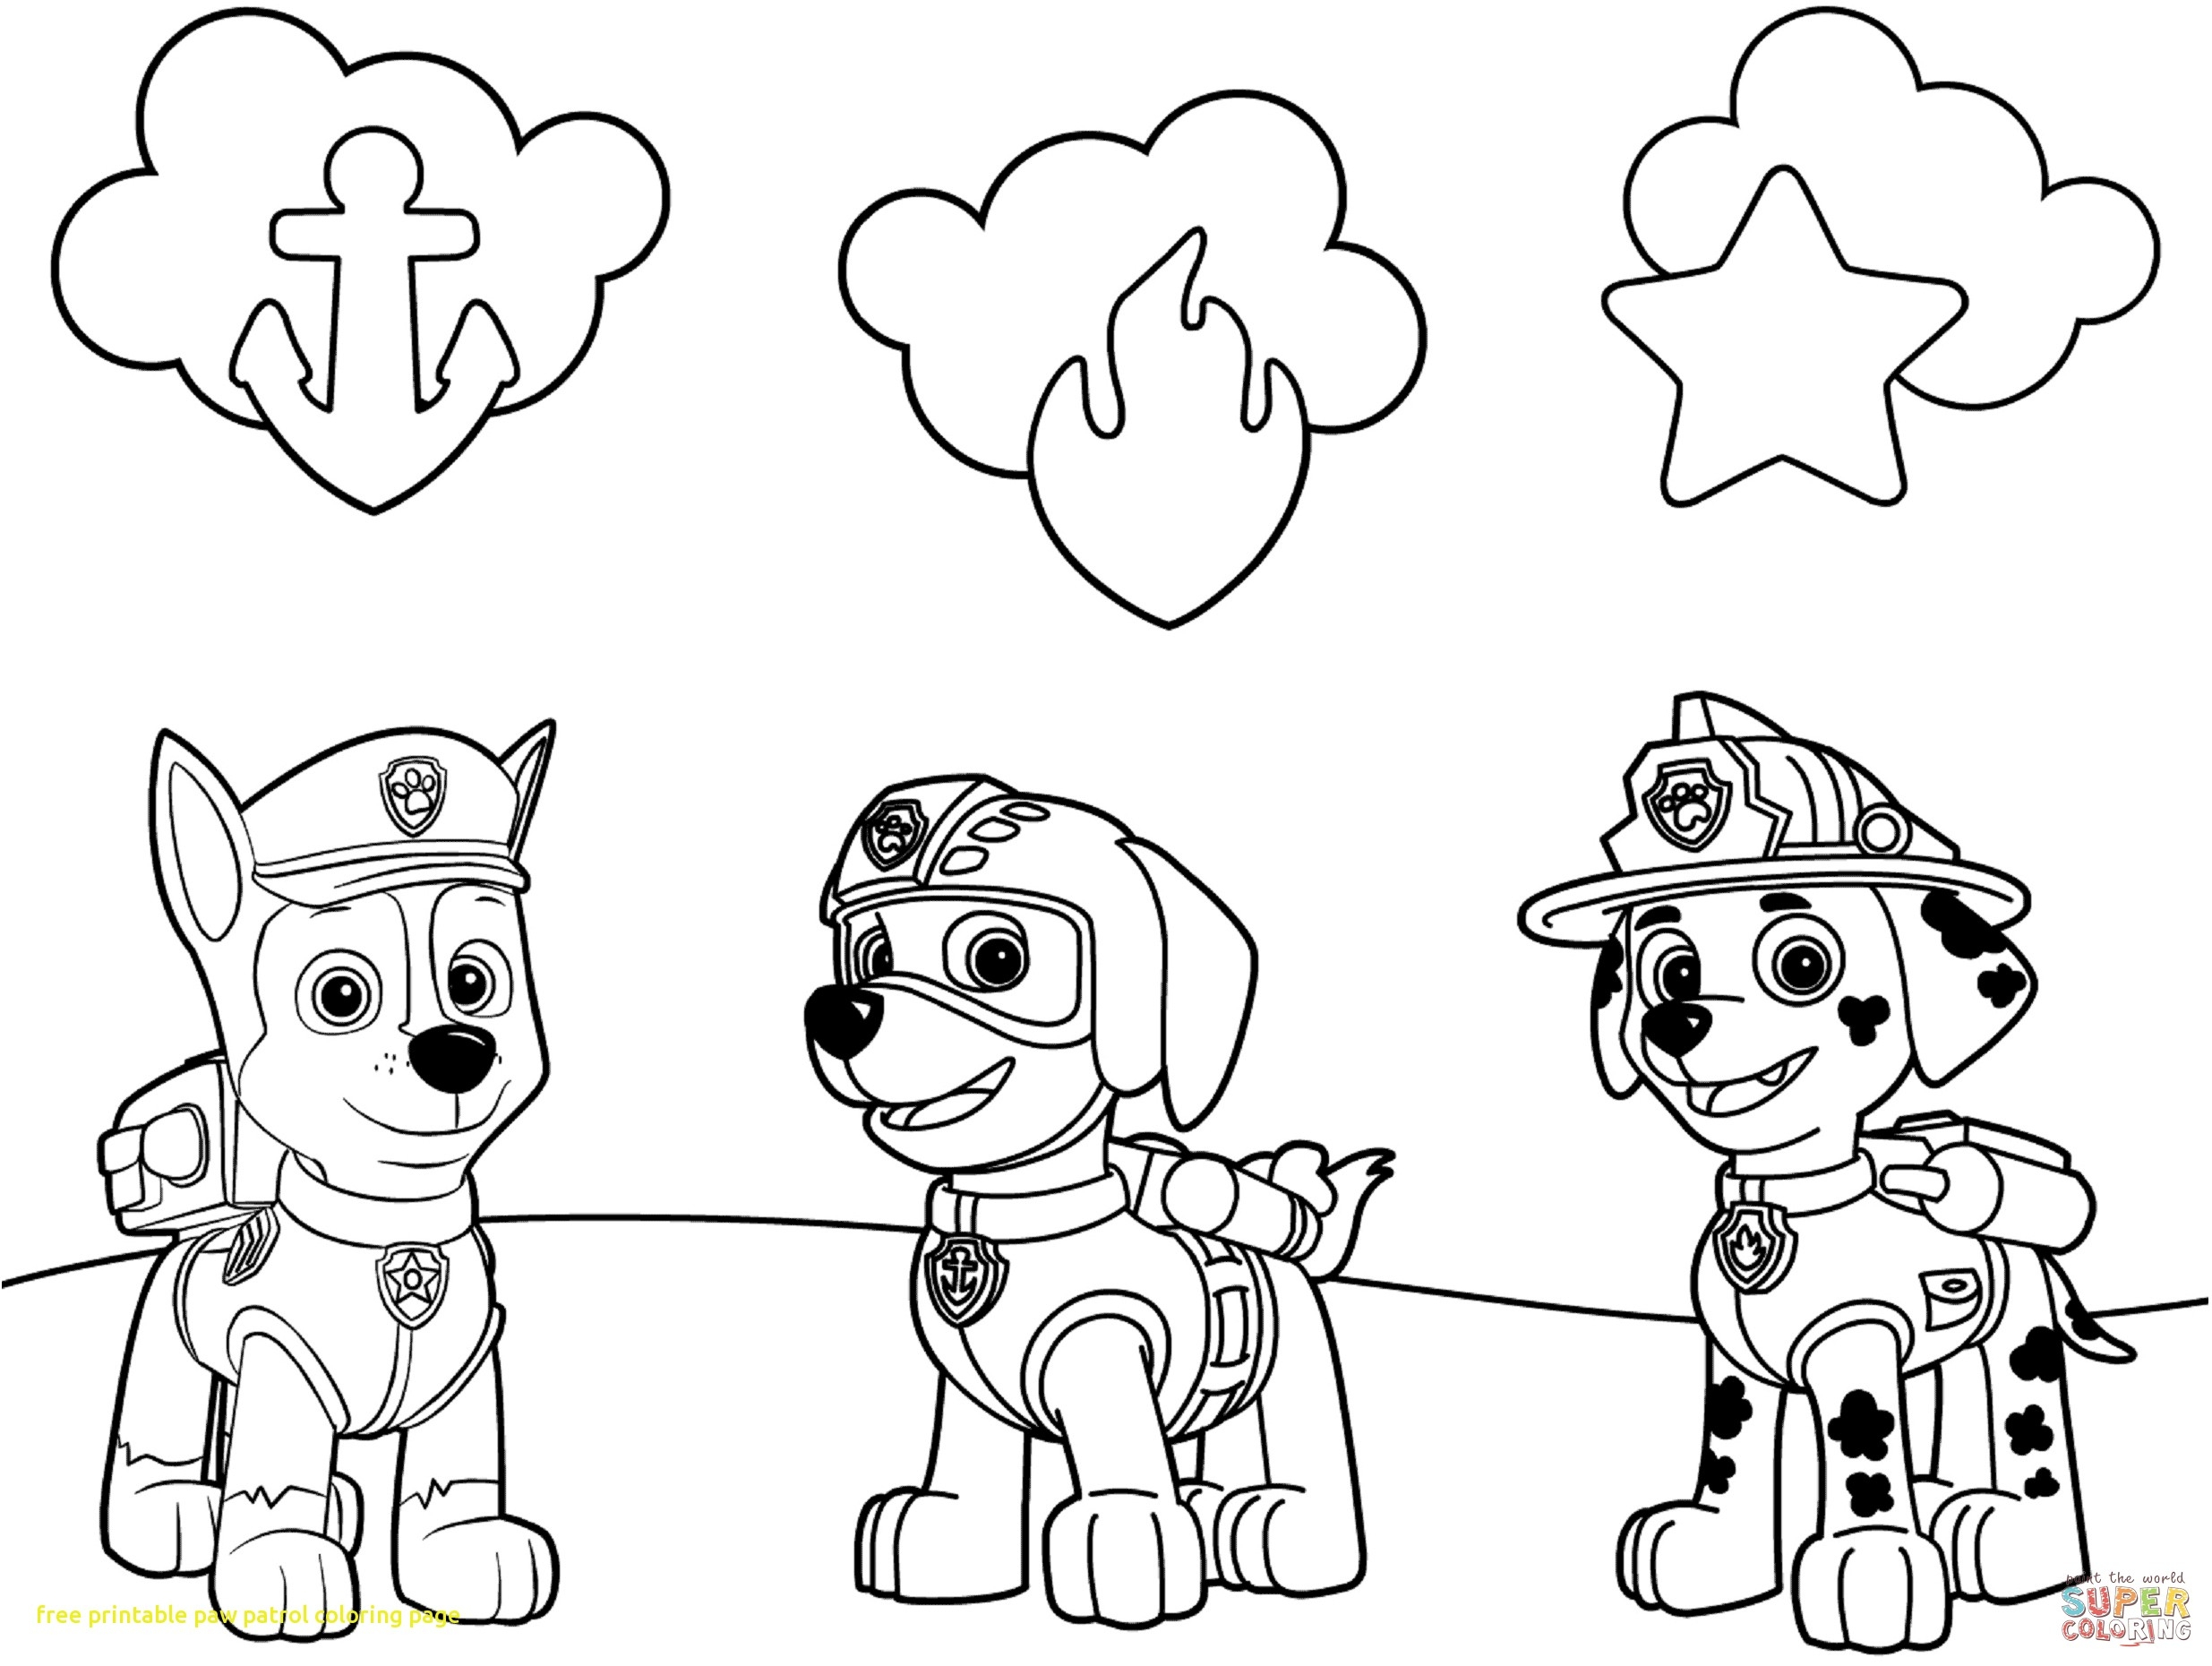 Paw Patrol Coloring Pages Marshall Marshall Paw Patrol Coloring Page At Getdrawings Free For